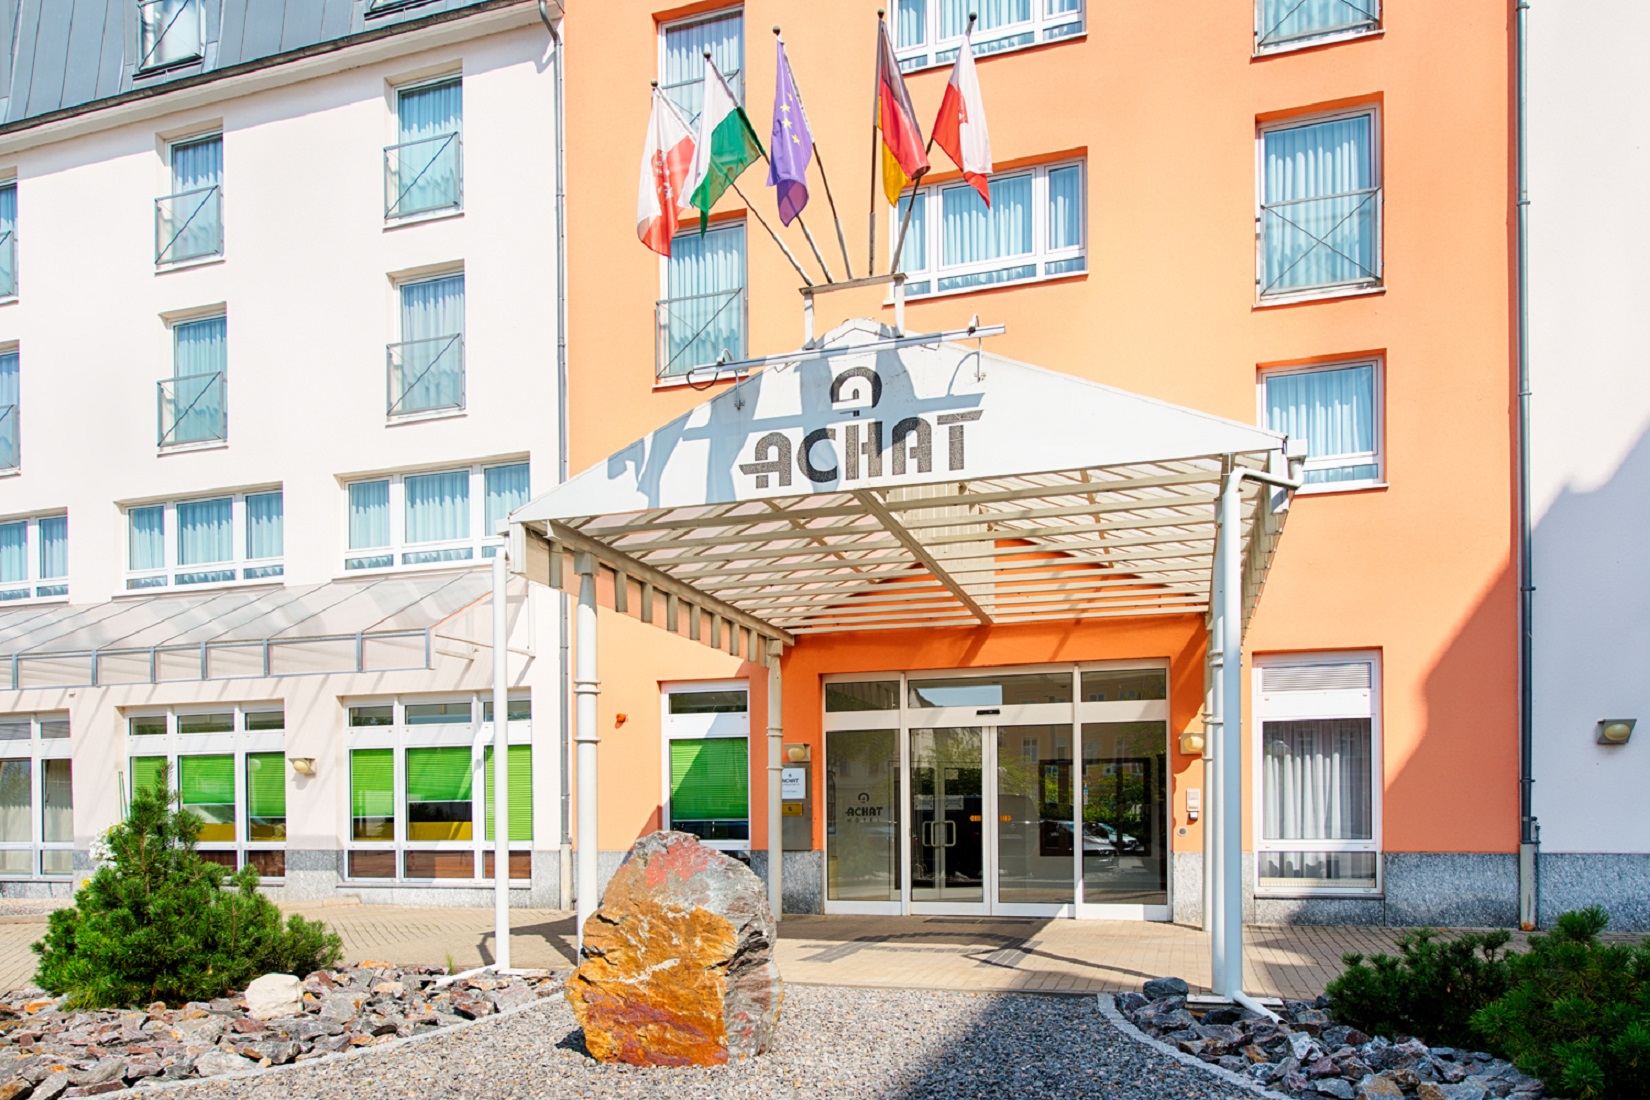 ACHAT Hotel Zwickau <br/>62.00 ew <br/> <a href='http://vakantieoplossing.nl/outpage/?id=0acc01672cbc3b81441f1713af75f026' target='_blank'>View Details</a>